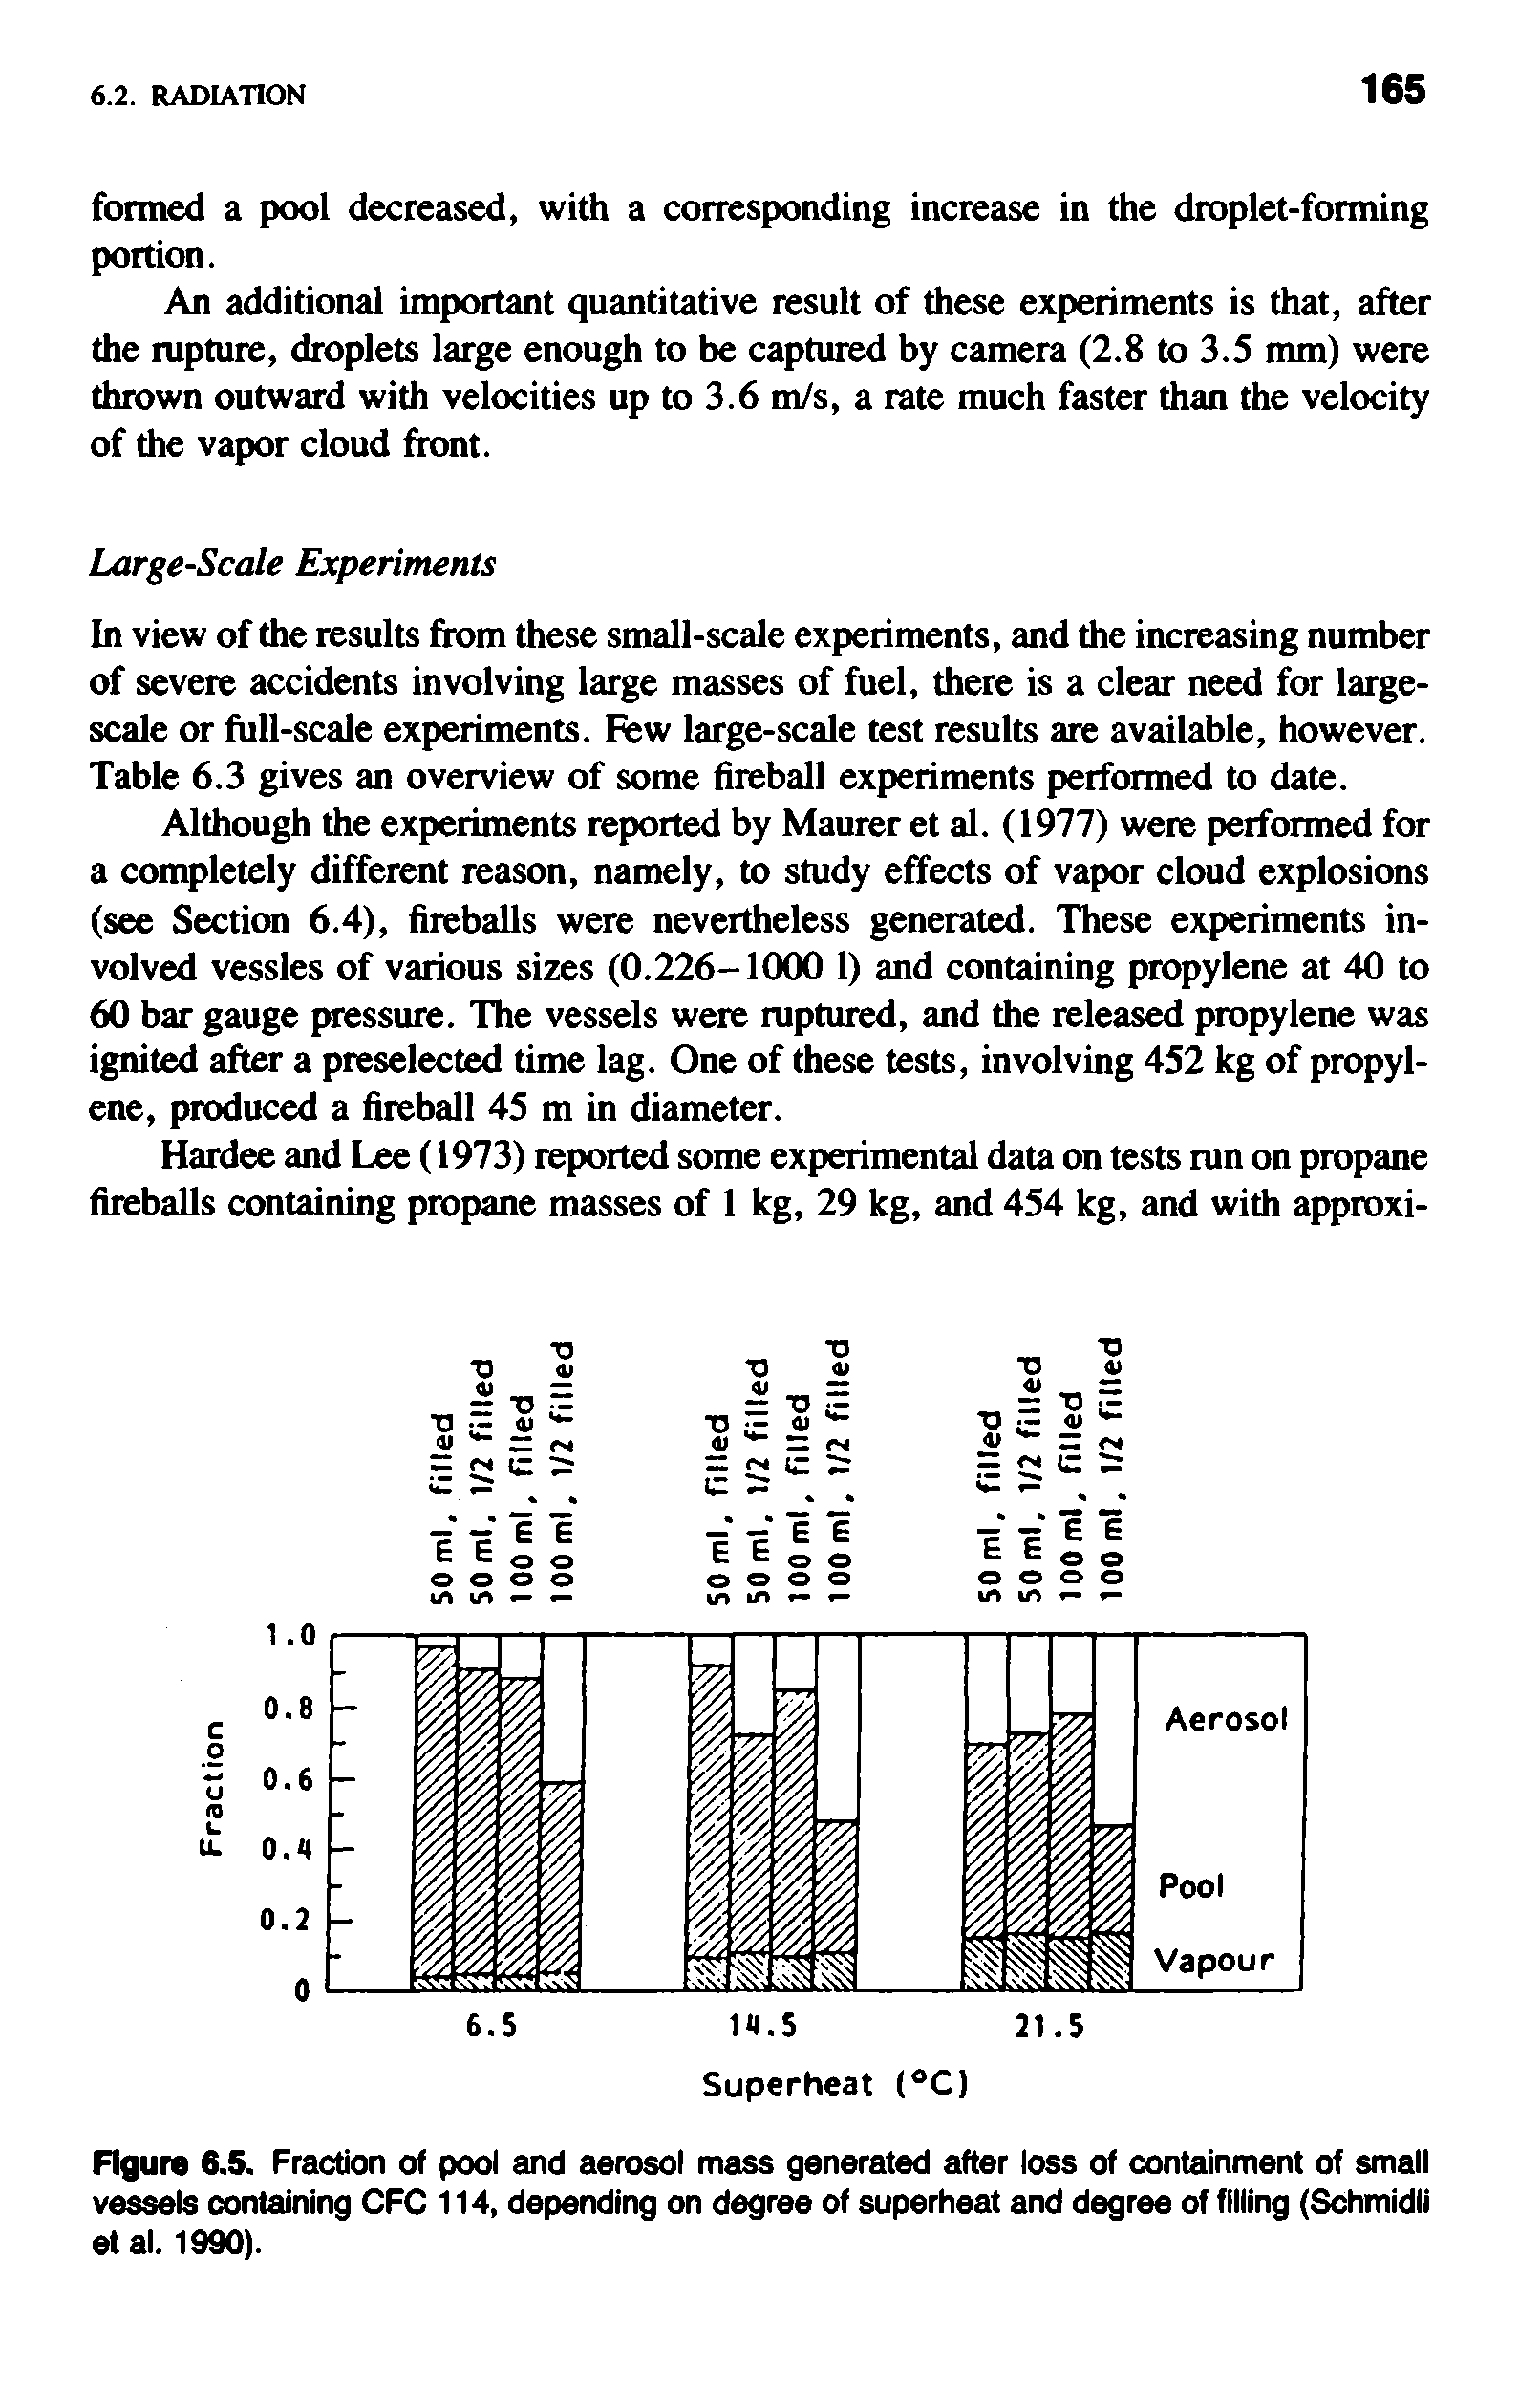 Figure 6.5. Fraction of pool and aerosol mass generated after loss of containment of small vessels containing CFG 114, depending on degree of superheat and degree of filling (Schmidli etal. 1990).